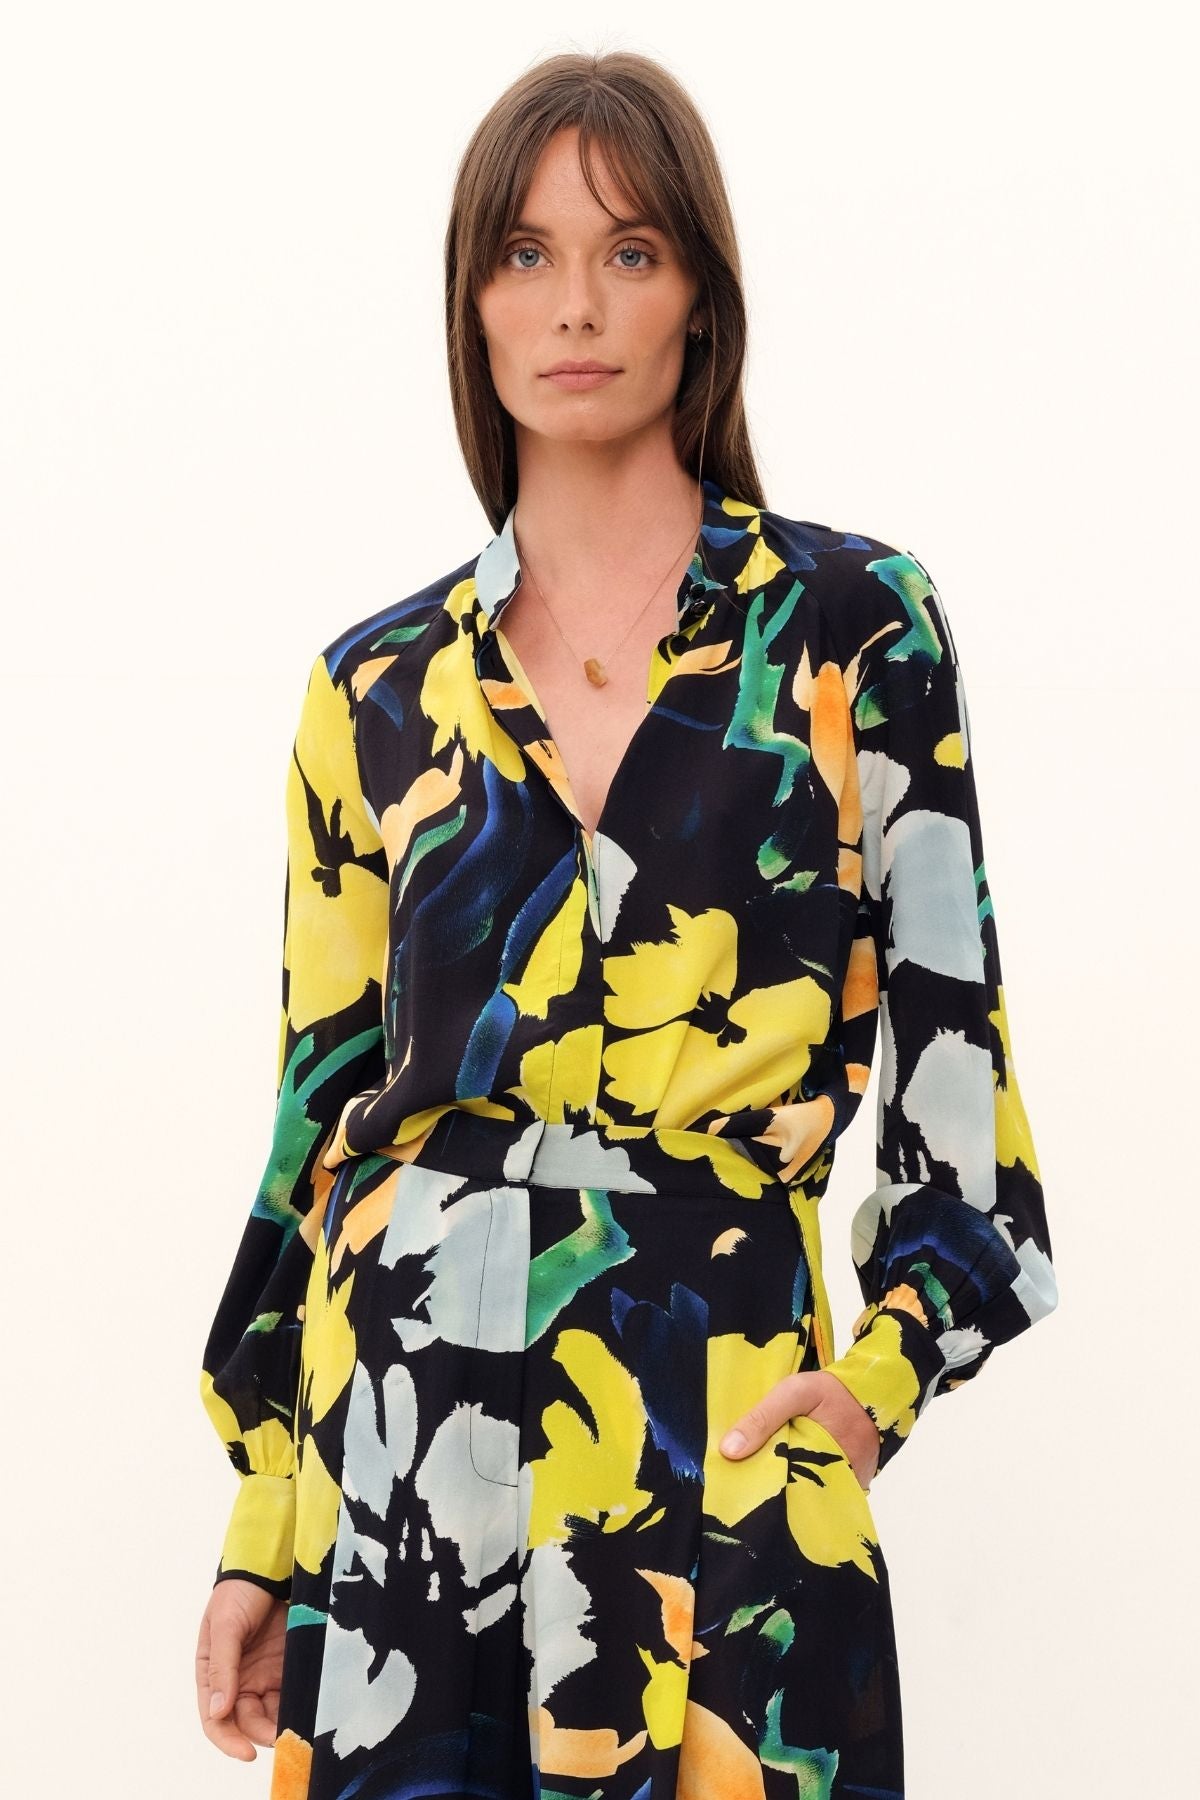 The Silk Hereafter Blouse by GINGER & SMART with a Artful floral print, pastel colors on rich navy base. Mandarin collar, concealed placket, full raglan long sleeve. Lightweight.